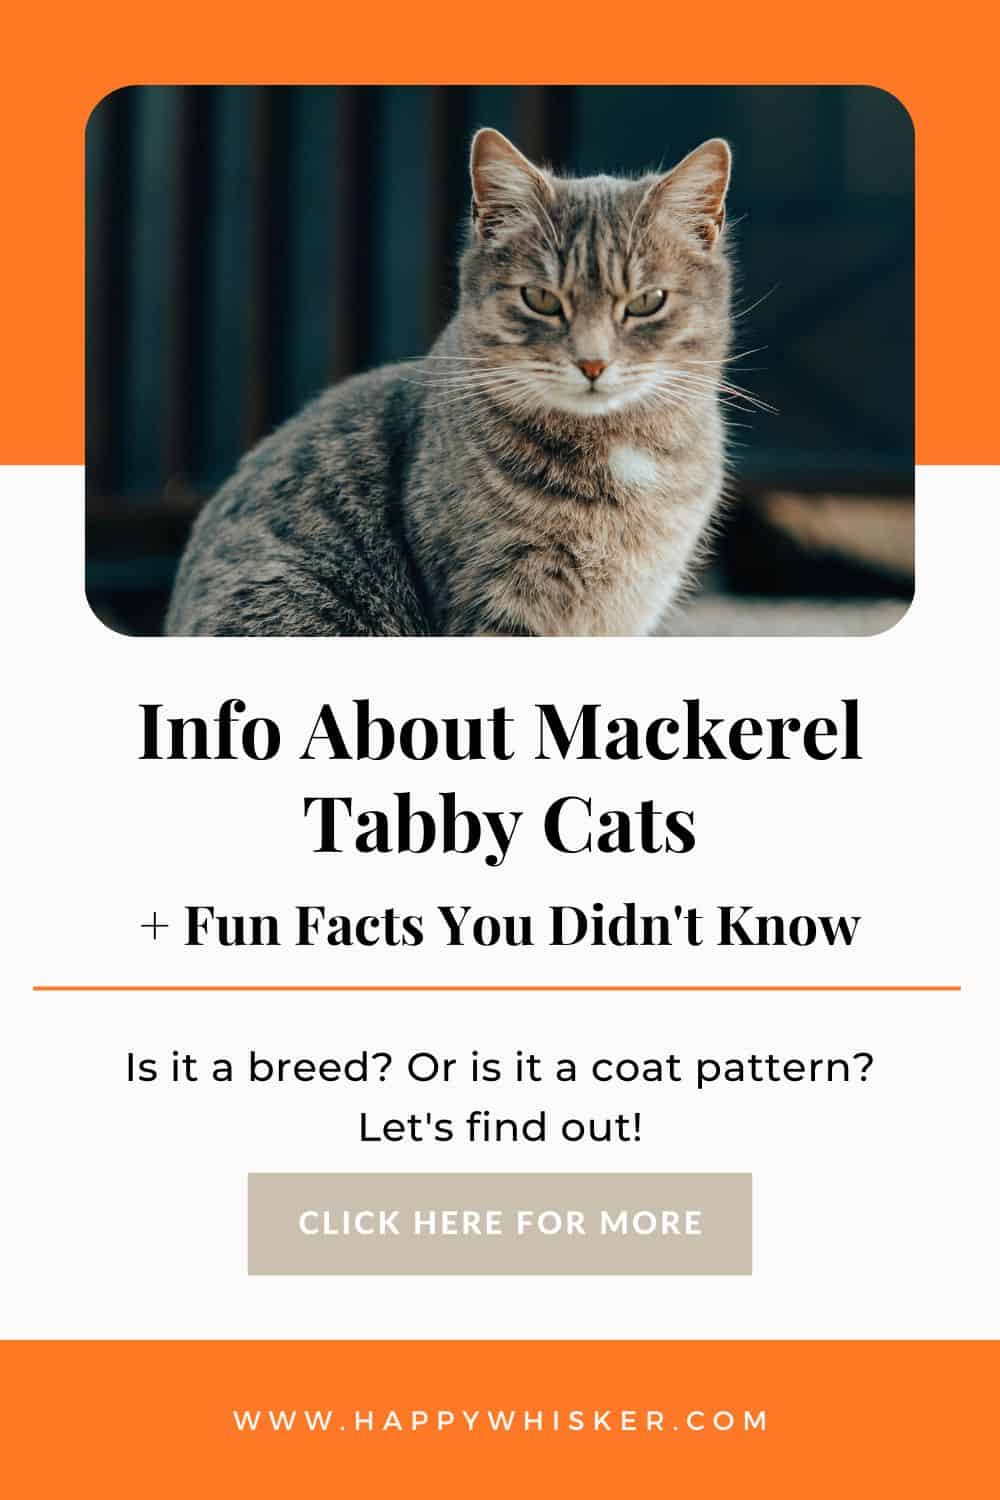 Info About Mackerel Tabby Cats + Fun Facts You Didn't Know Pinterest